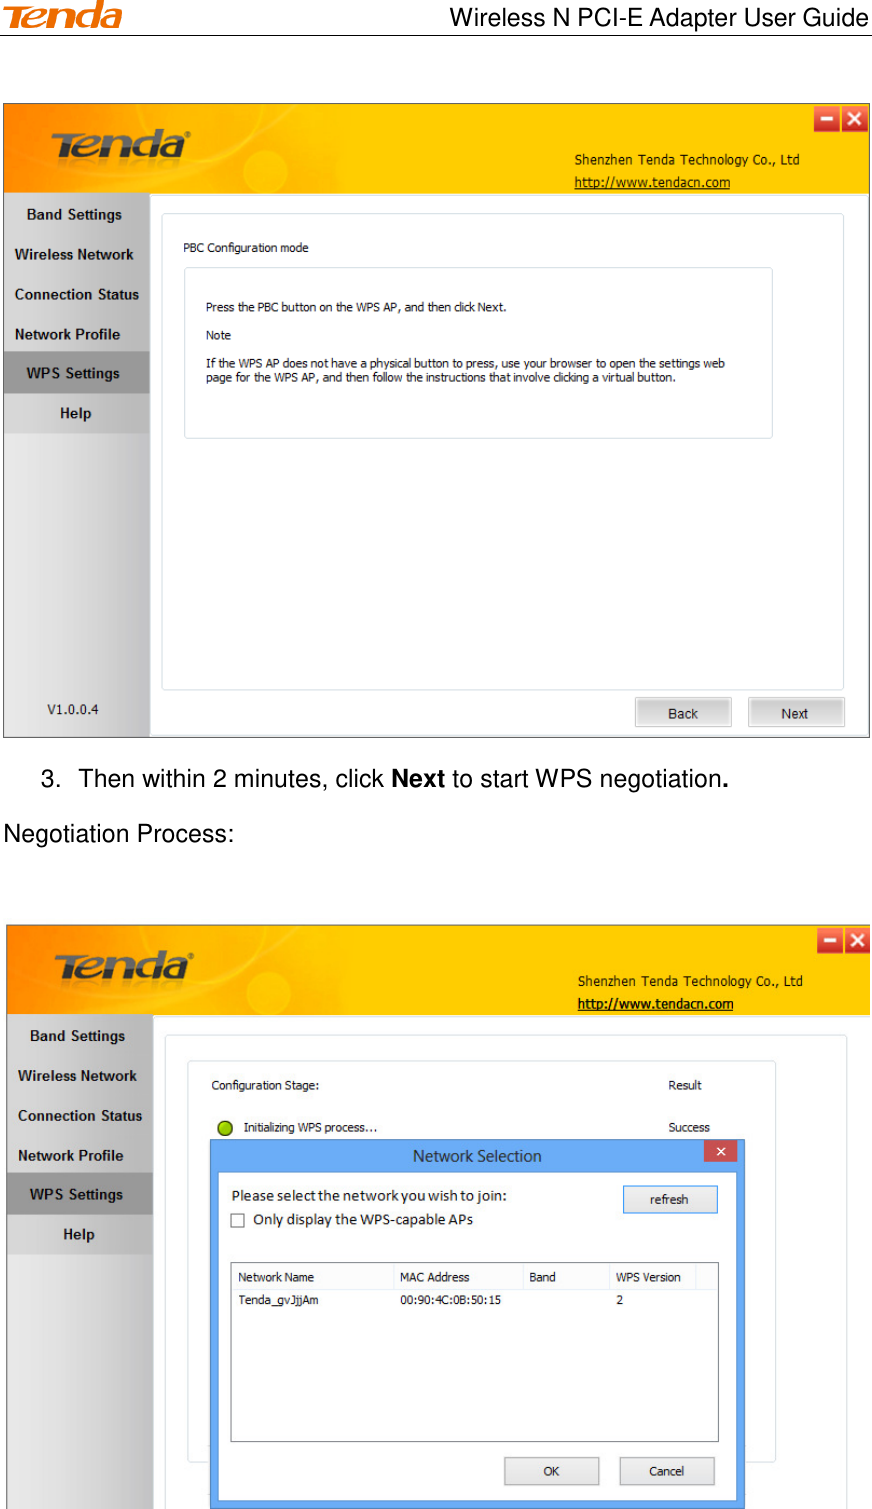                                    Wireless N PCI-E Adapter User Guide  3.  Then within 2 minutes, click Next to start WPS negotiation. Negotiation Process:  